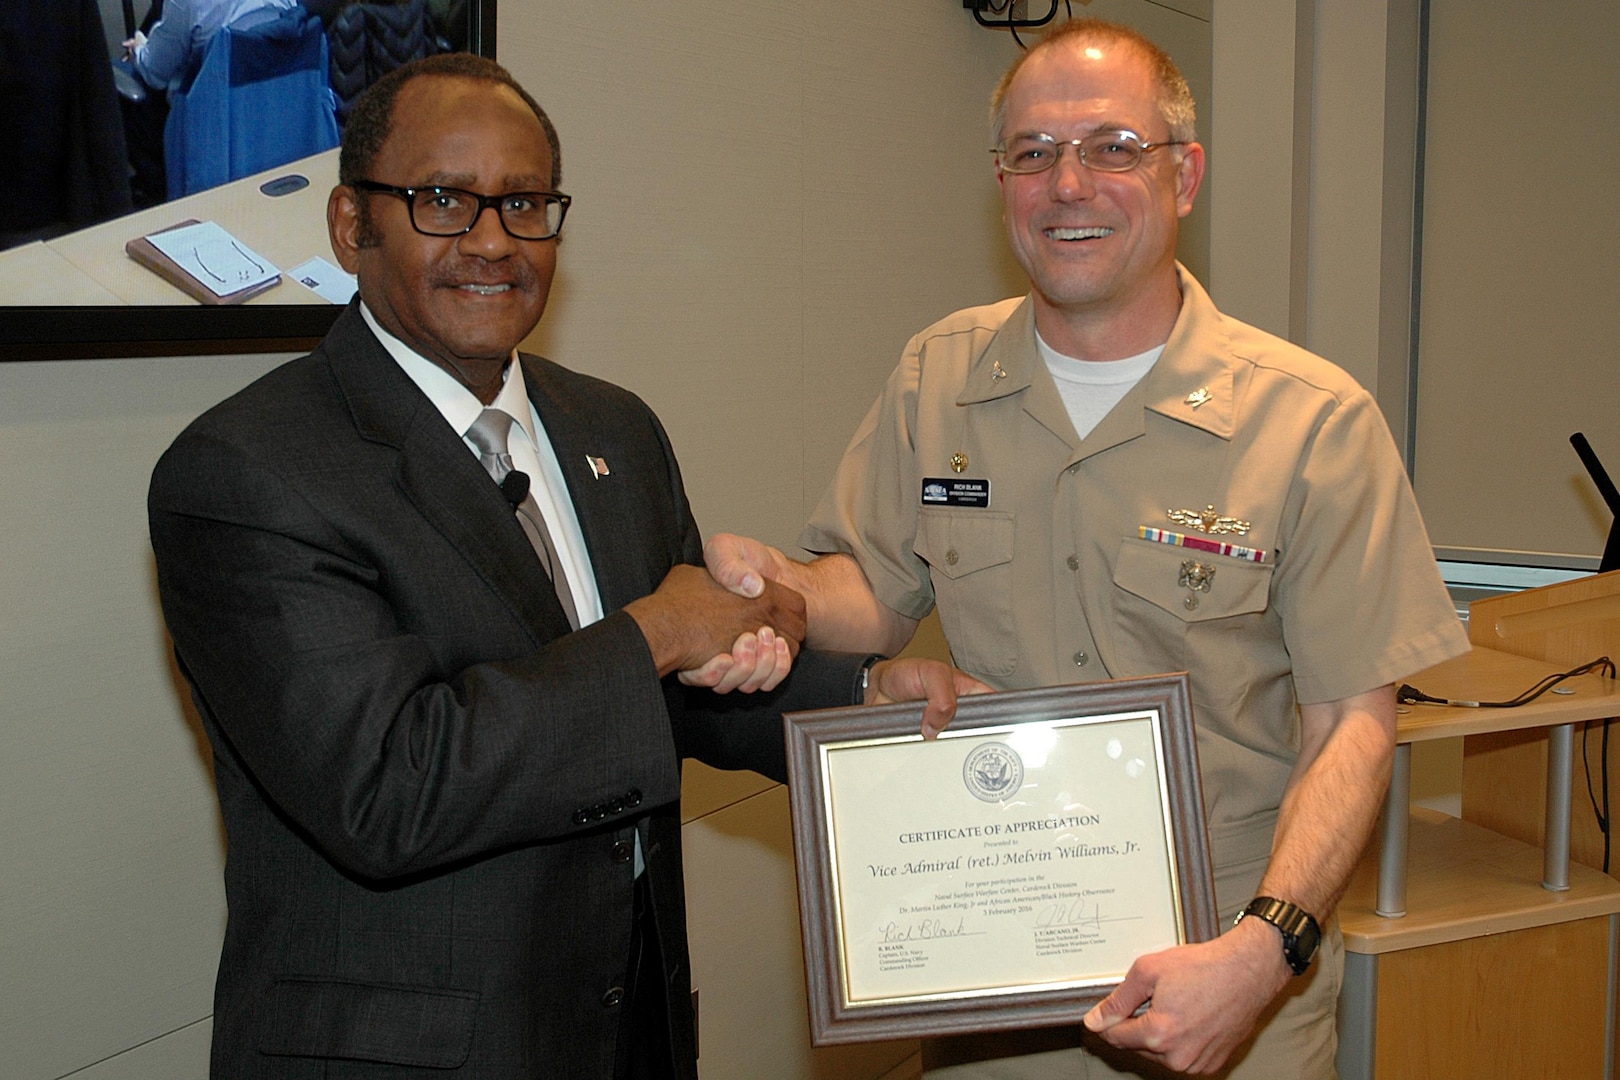 Retired Vice Adm. Melvin Williams Jr. receives a certificate of appreciation from Naval Surface Warfare Center, Carderock Division Commanding Officer Capt. Rich Blank for speaking at the command's Martin Luther King Jr. Day/African American History Month observance in West Bethesda, Md., Feb. 3, 2016. (U.S. Navy photo by Harry Friedman/Released)